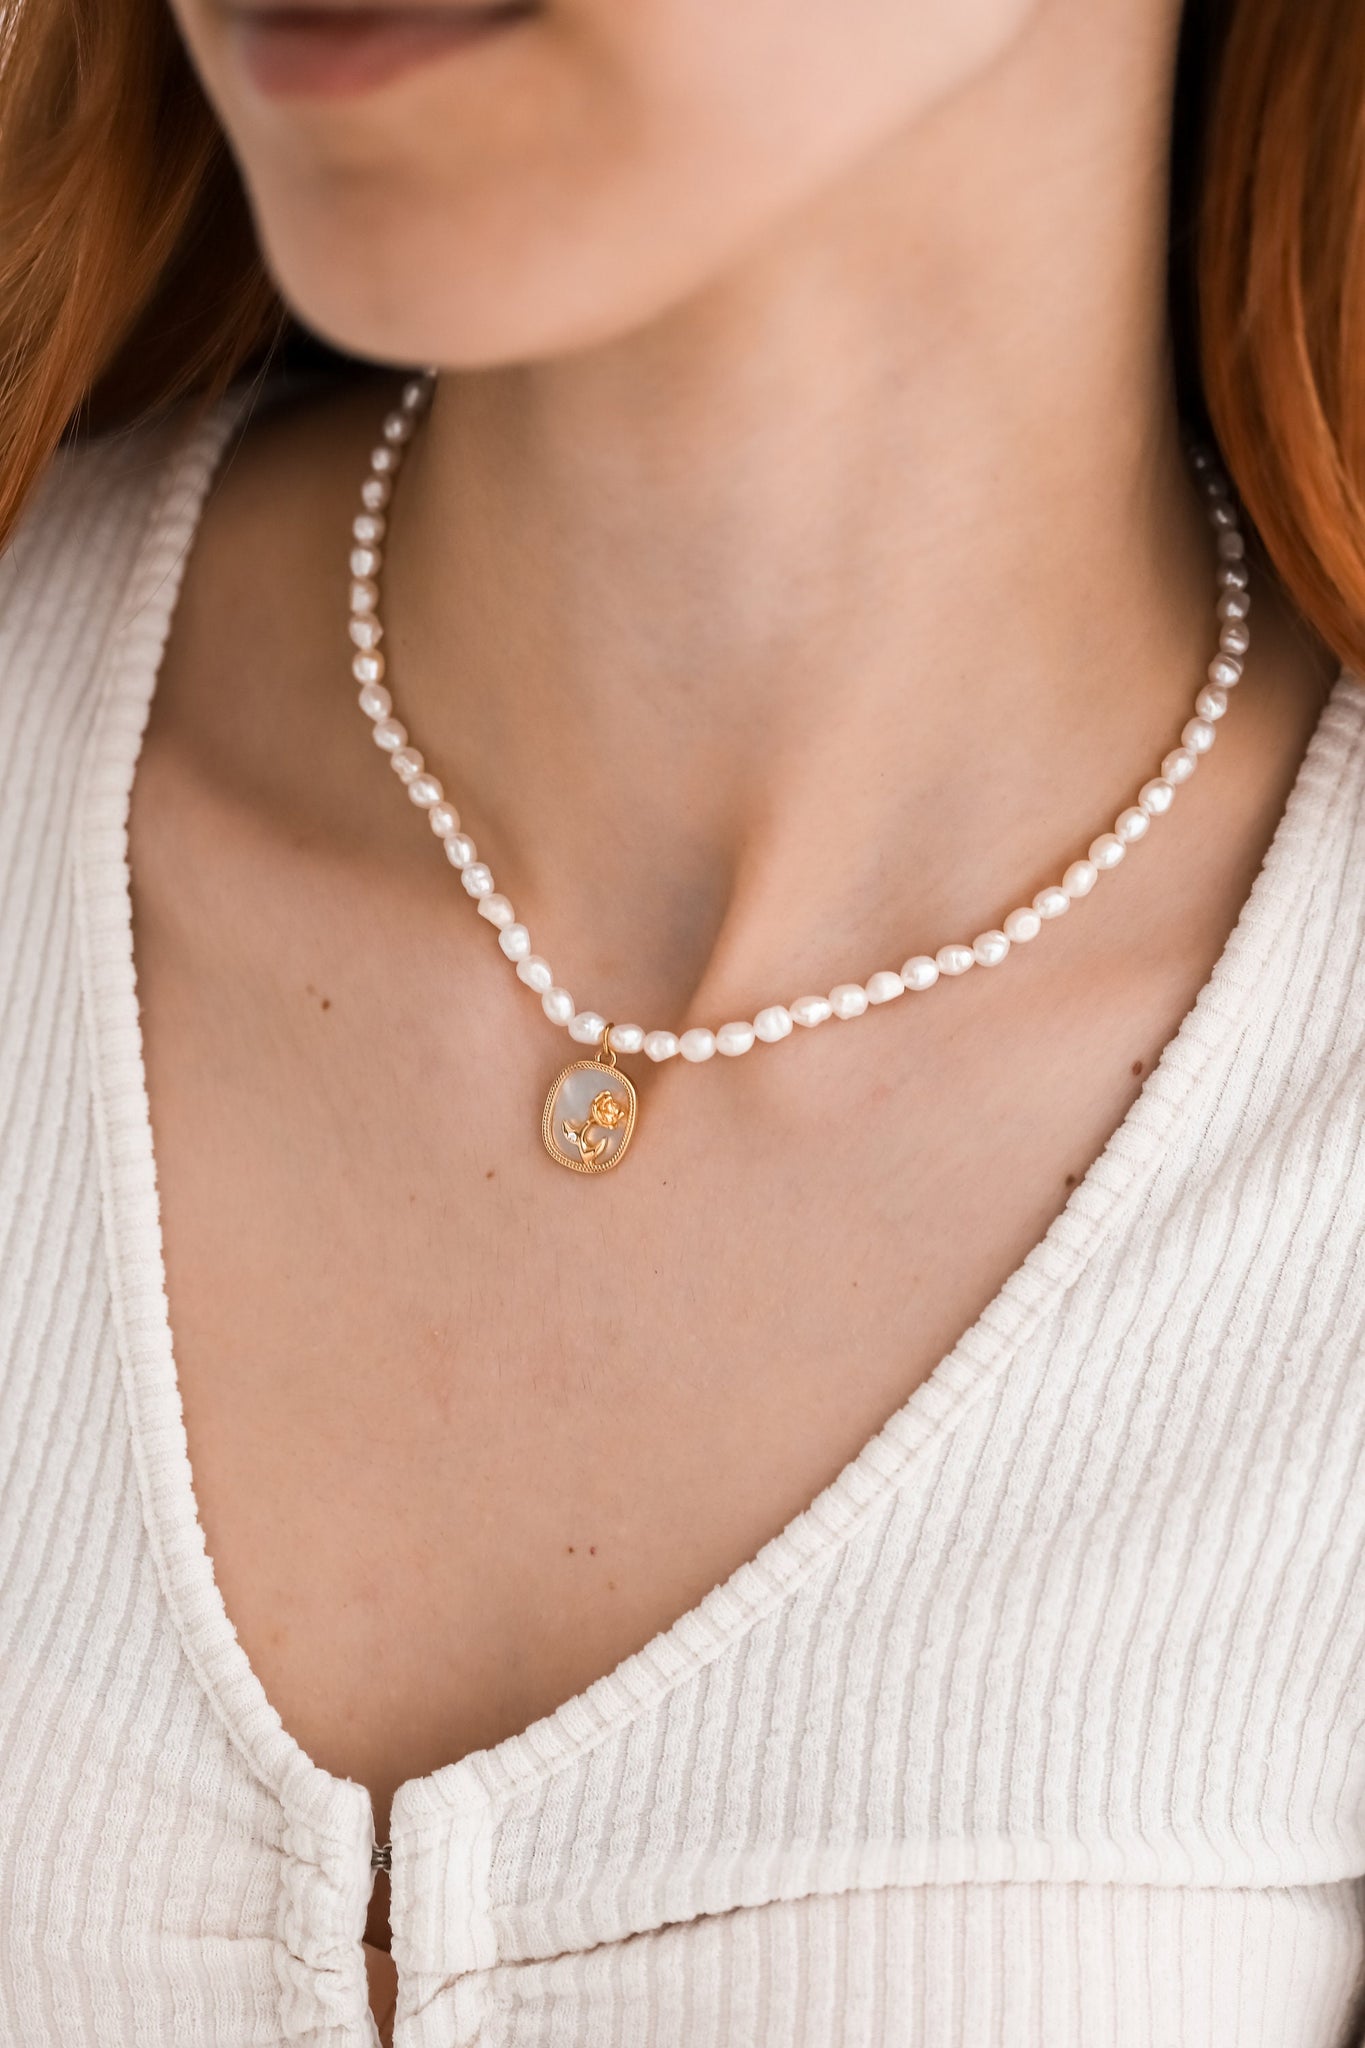 Rose Flower Necklace, 18K Gold, Mothers Day Gift, Floral Pearl Necklace, Gift For Mom, Flower Jewelry, Bridesmaid Necklace, Unique Jewelry